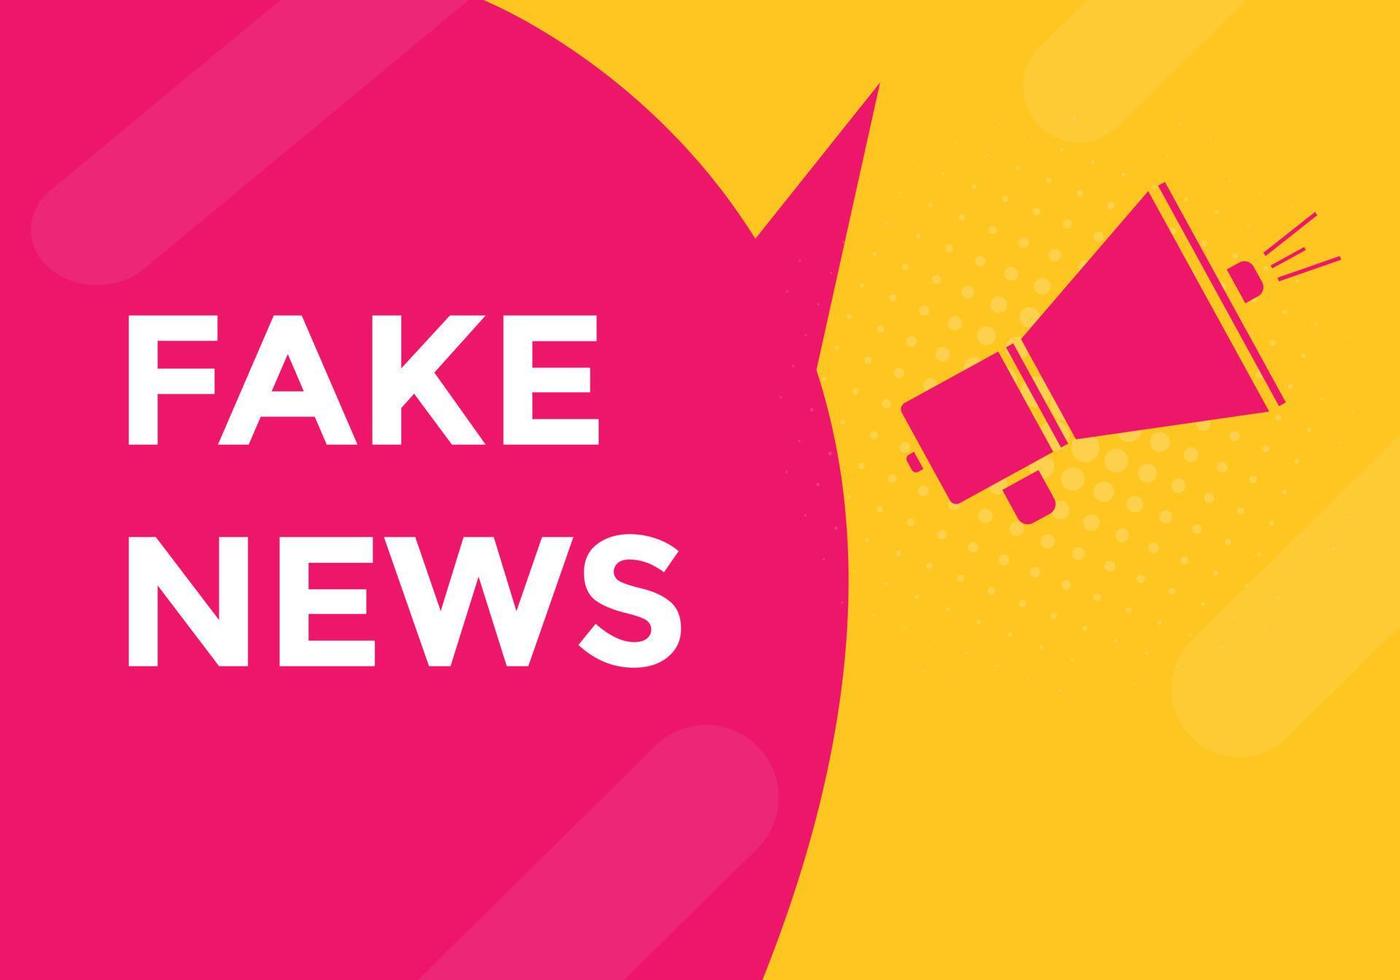 Fake news button. Fake news Colorful label sign template. speech bubble vector